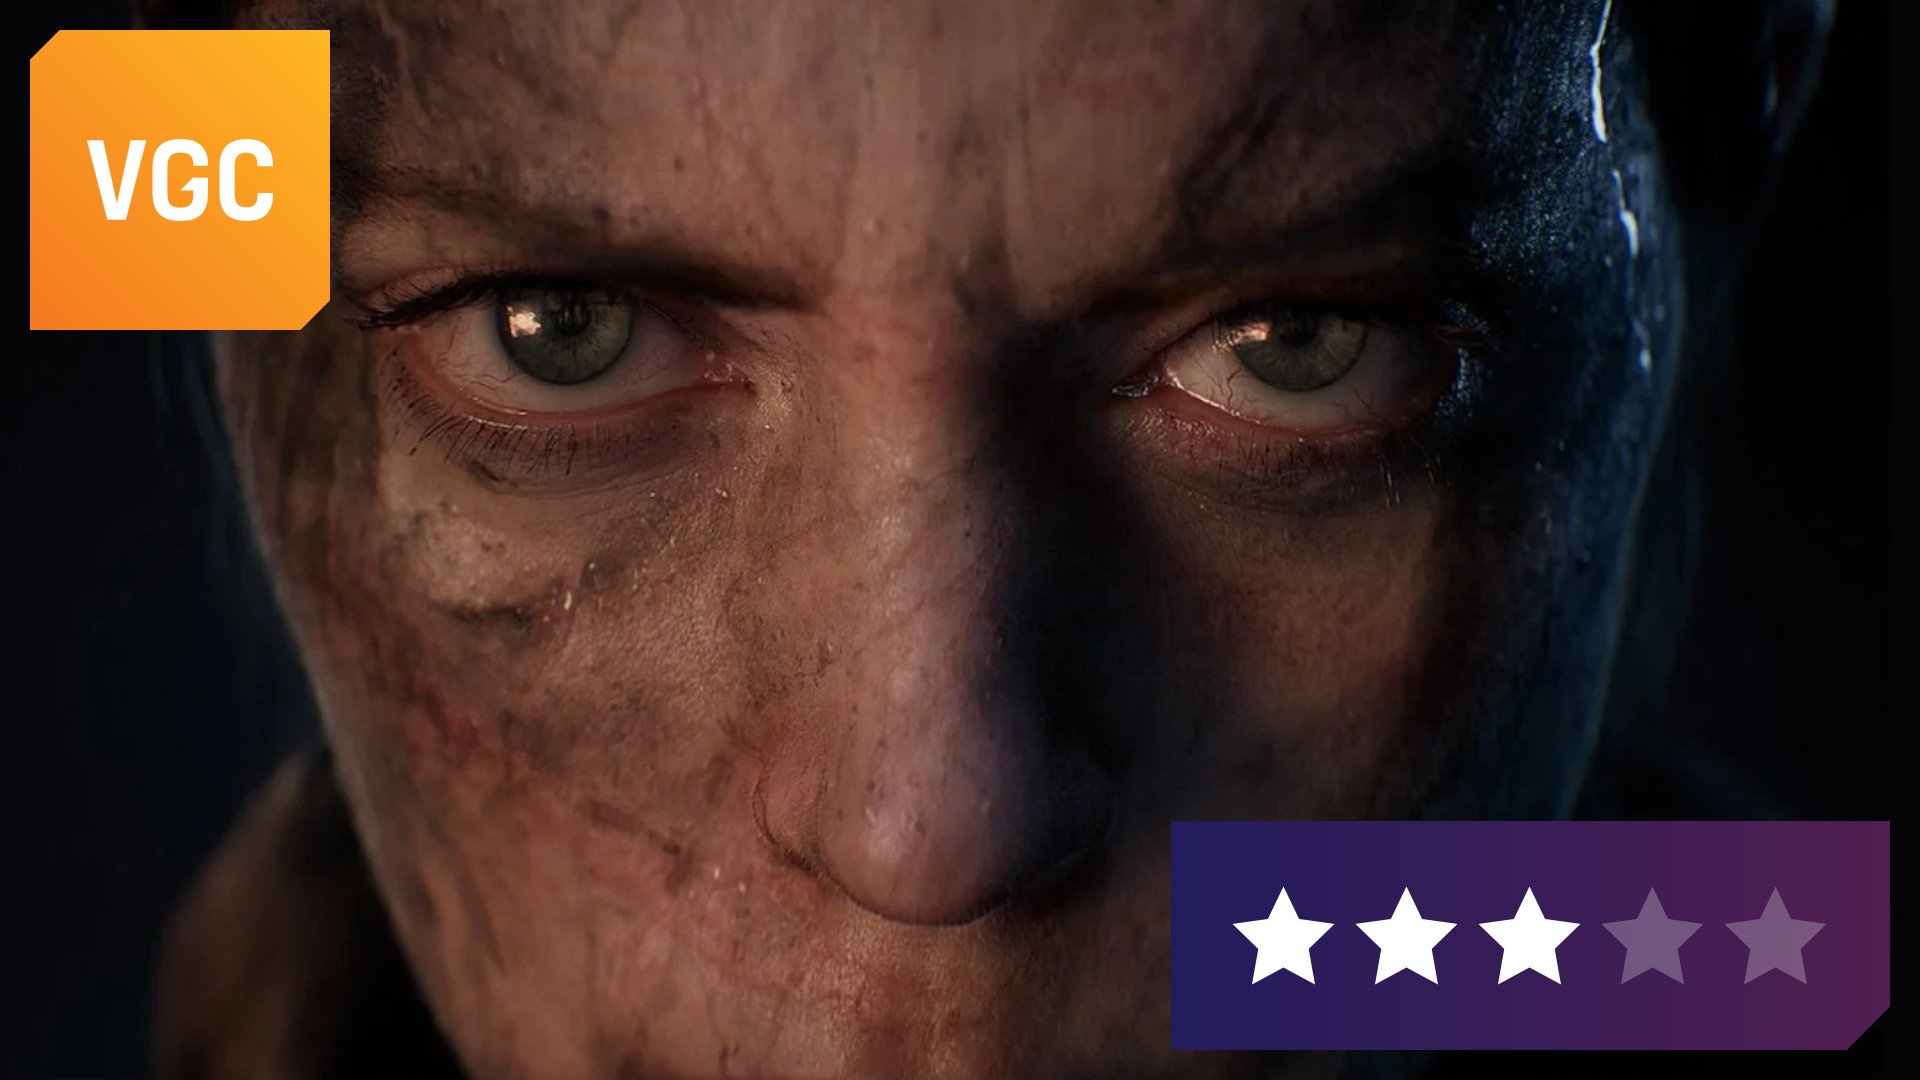 Hellblade 2’s masterful presentation is let down by dated gameplay